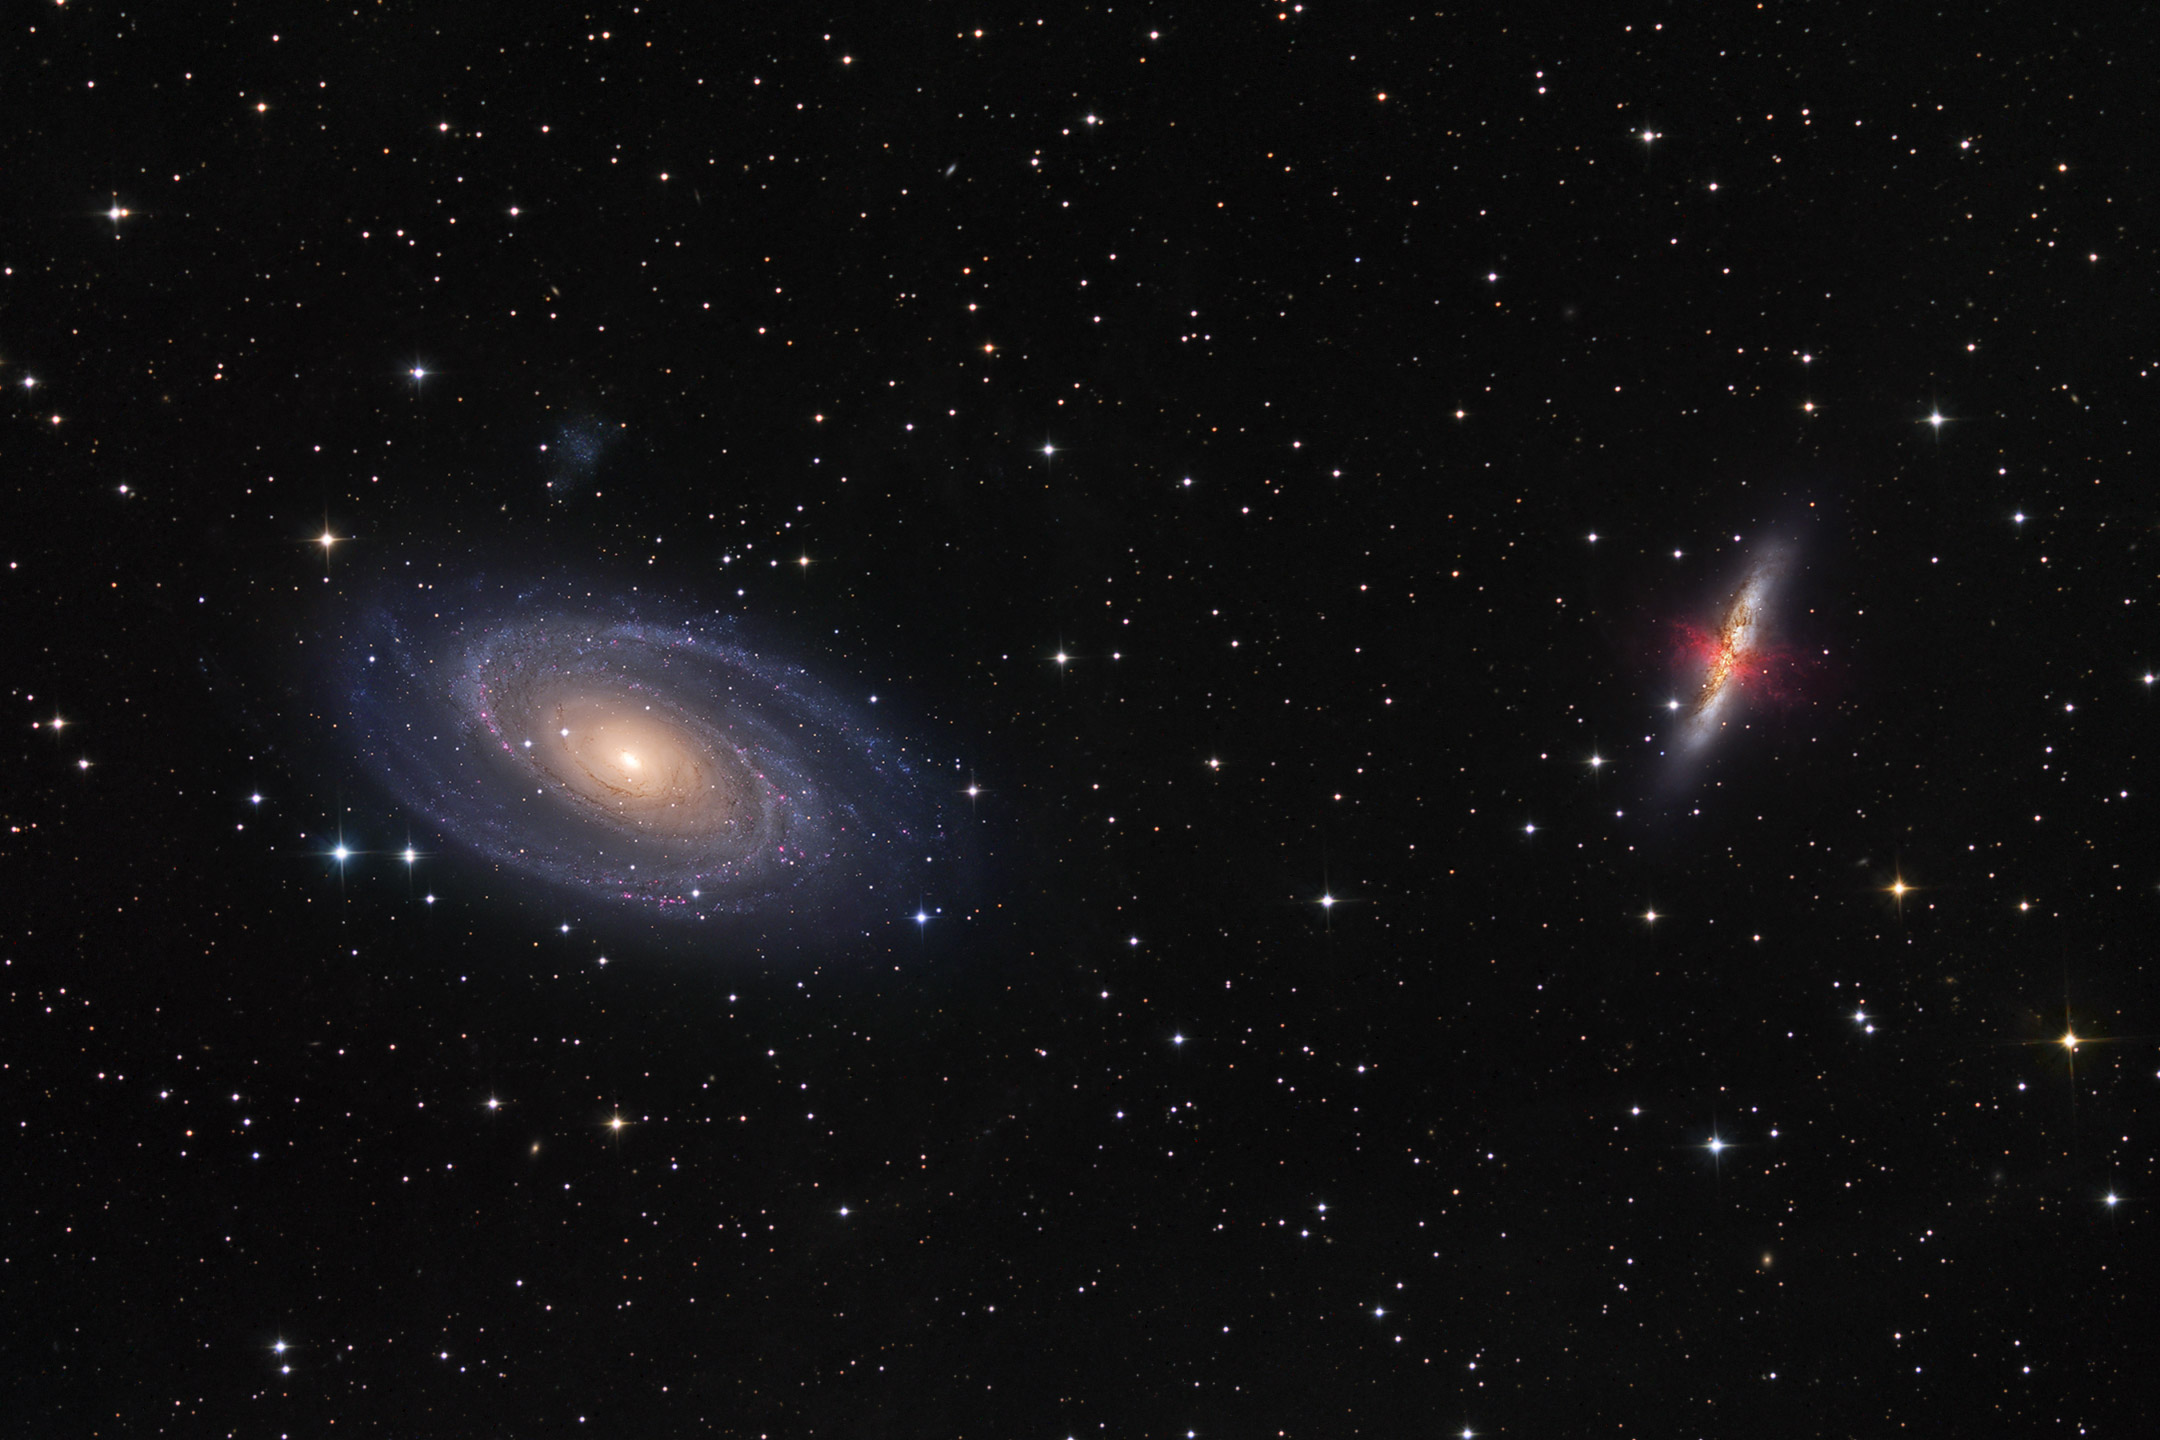 Galaxy M81 is on the left surrounded by blue spiral arms. On the right marked by massive gas and dust clouds, is Galaxy M82.